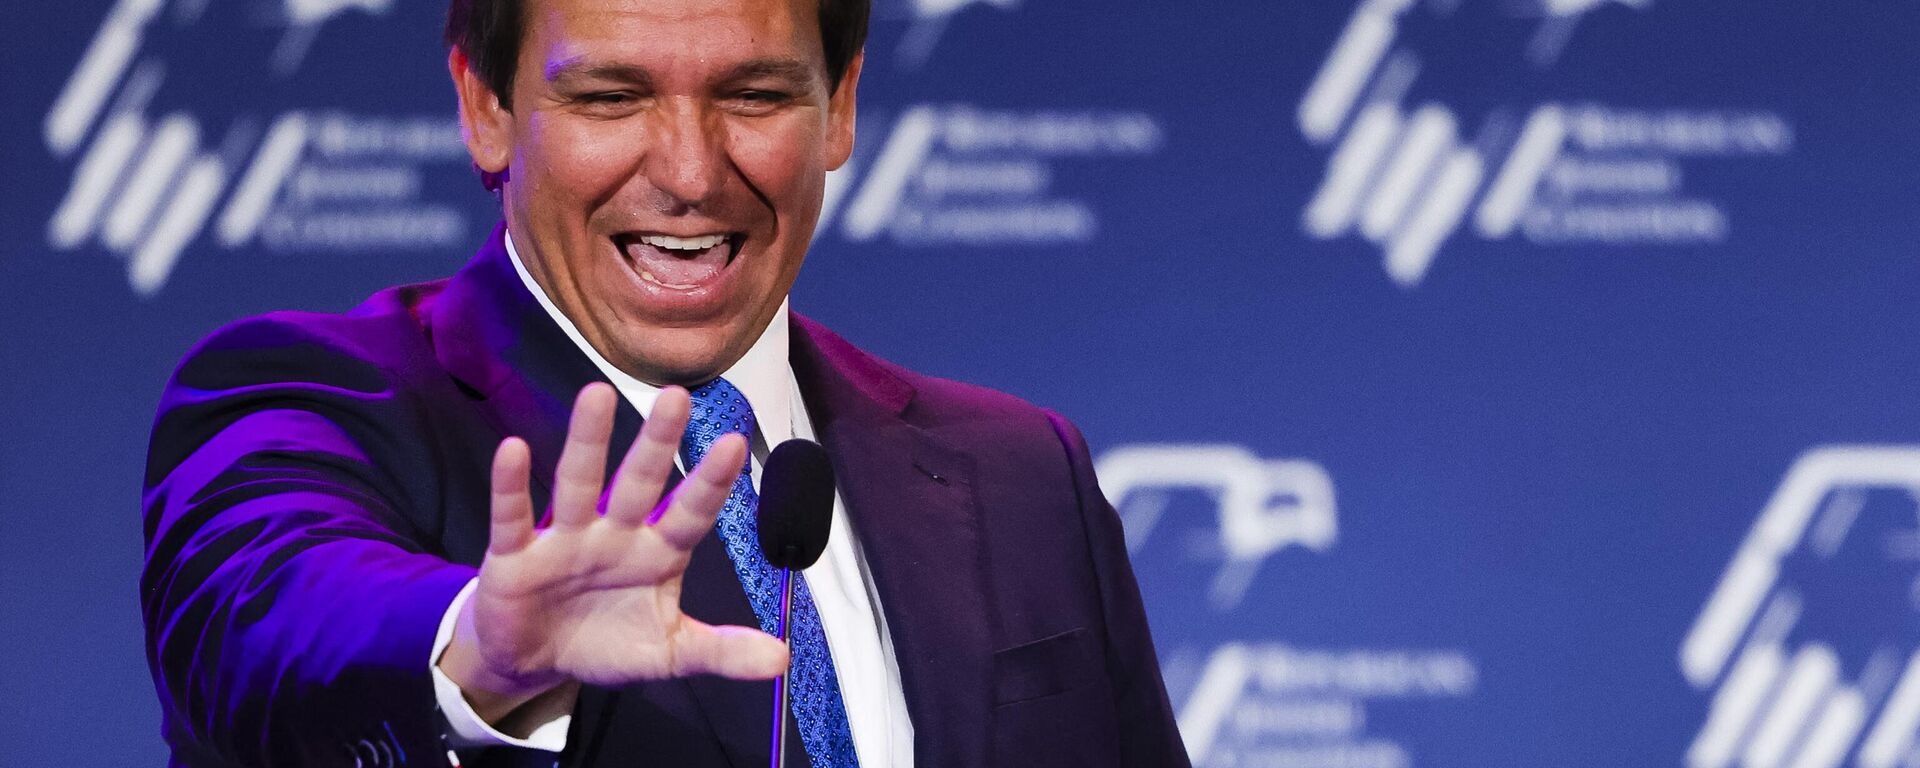 Republican Governor of Florida Ron DeSantis greets his supporters during the Republican Jewish Coalition annual leadership meeting in Las Vegas, Nevada, November 19, 2022 - Sputnik International, 1920, 26.05.2023